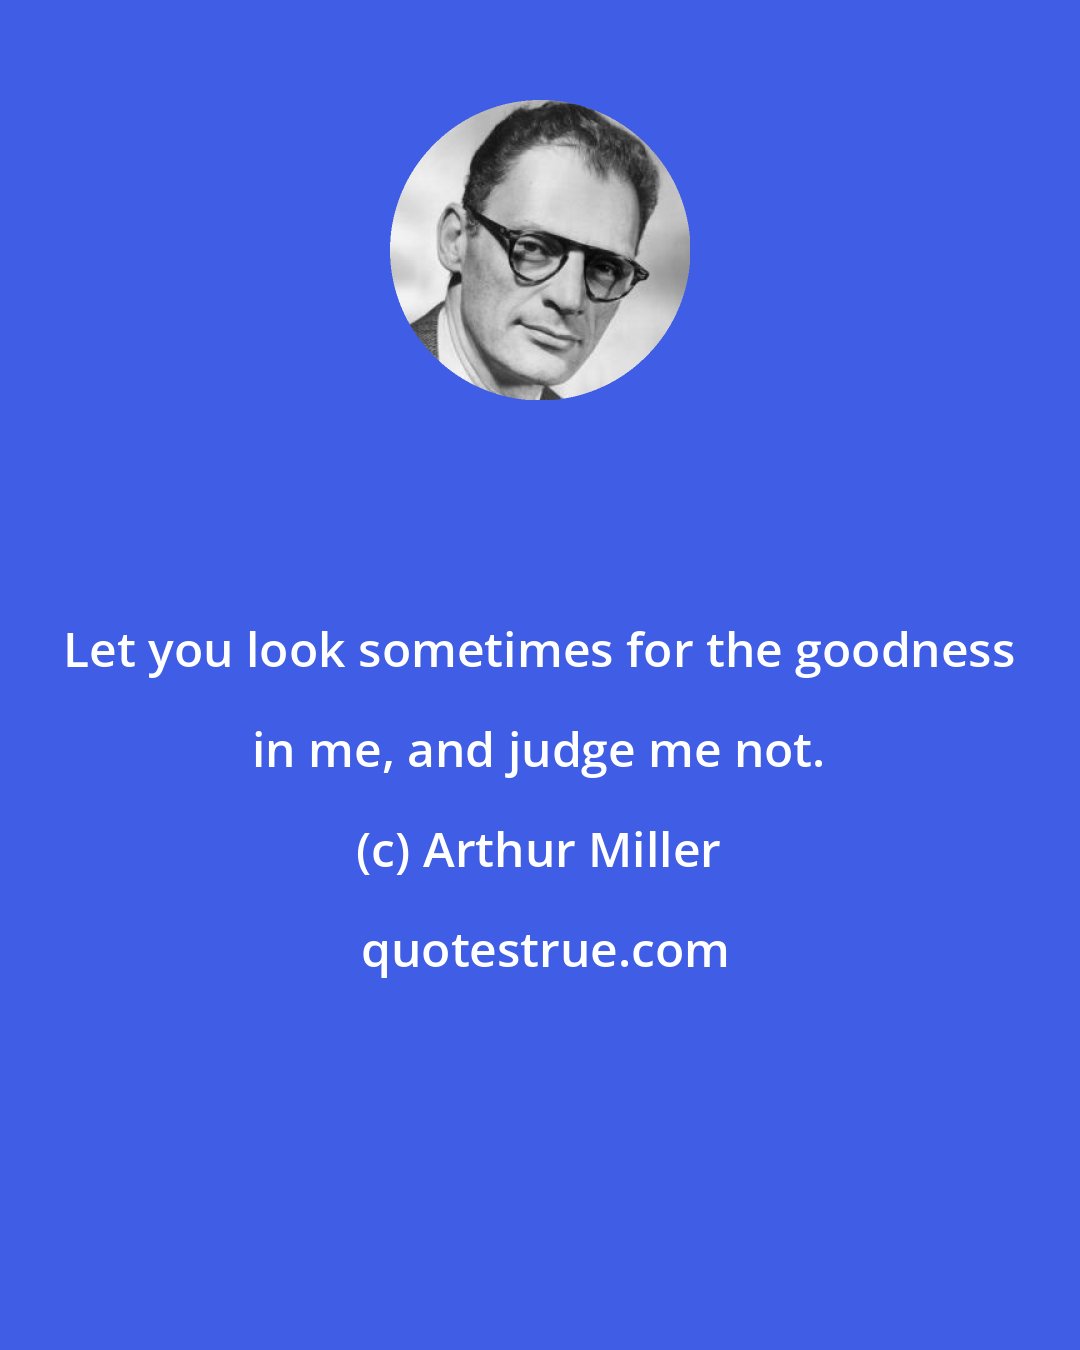 Arthur Miller: Let you look sometimes for the goodness in me, and judge me not.